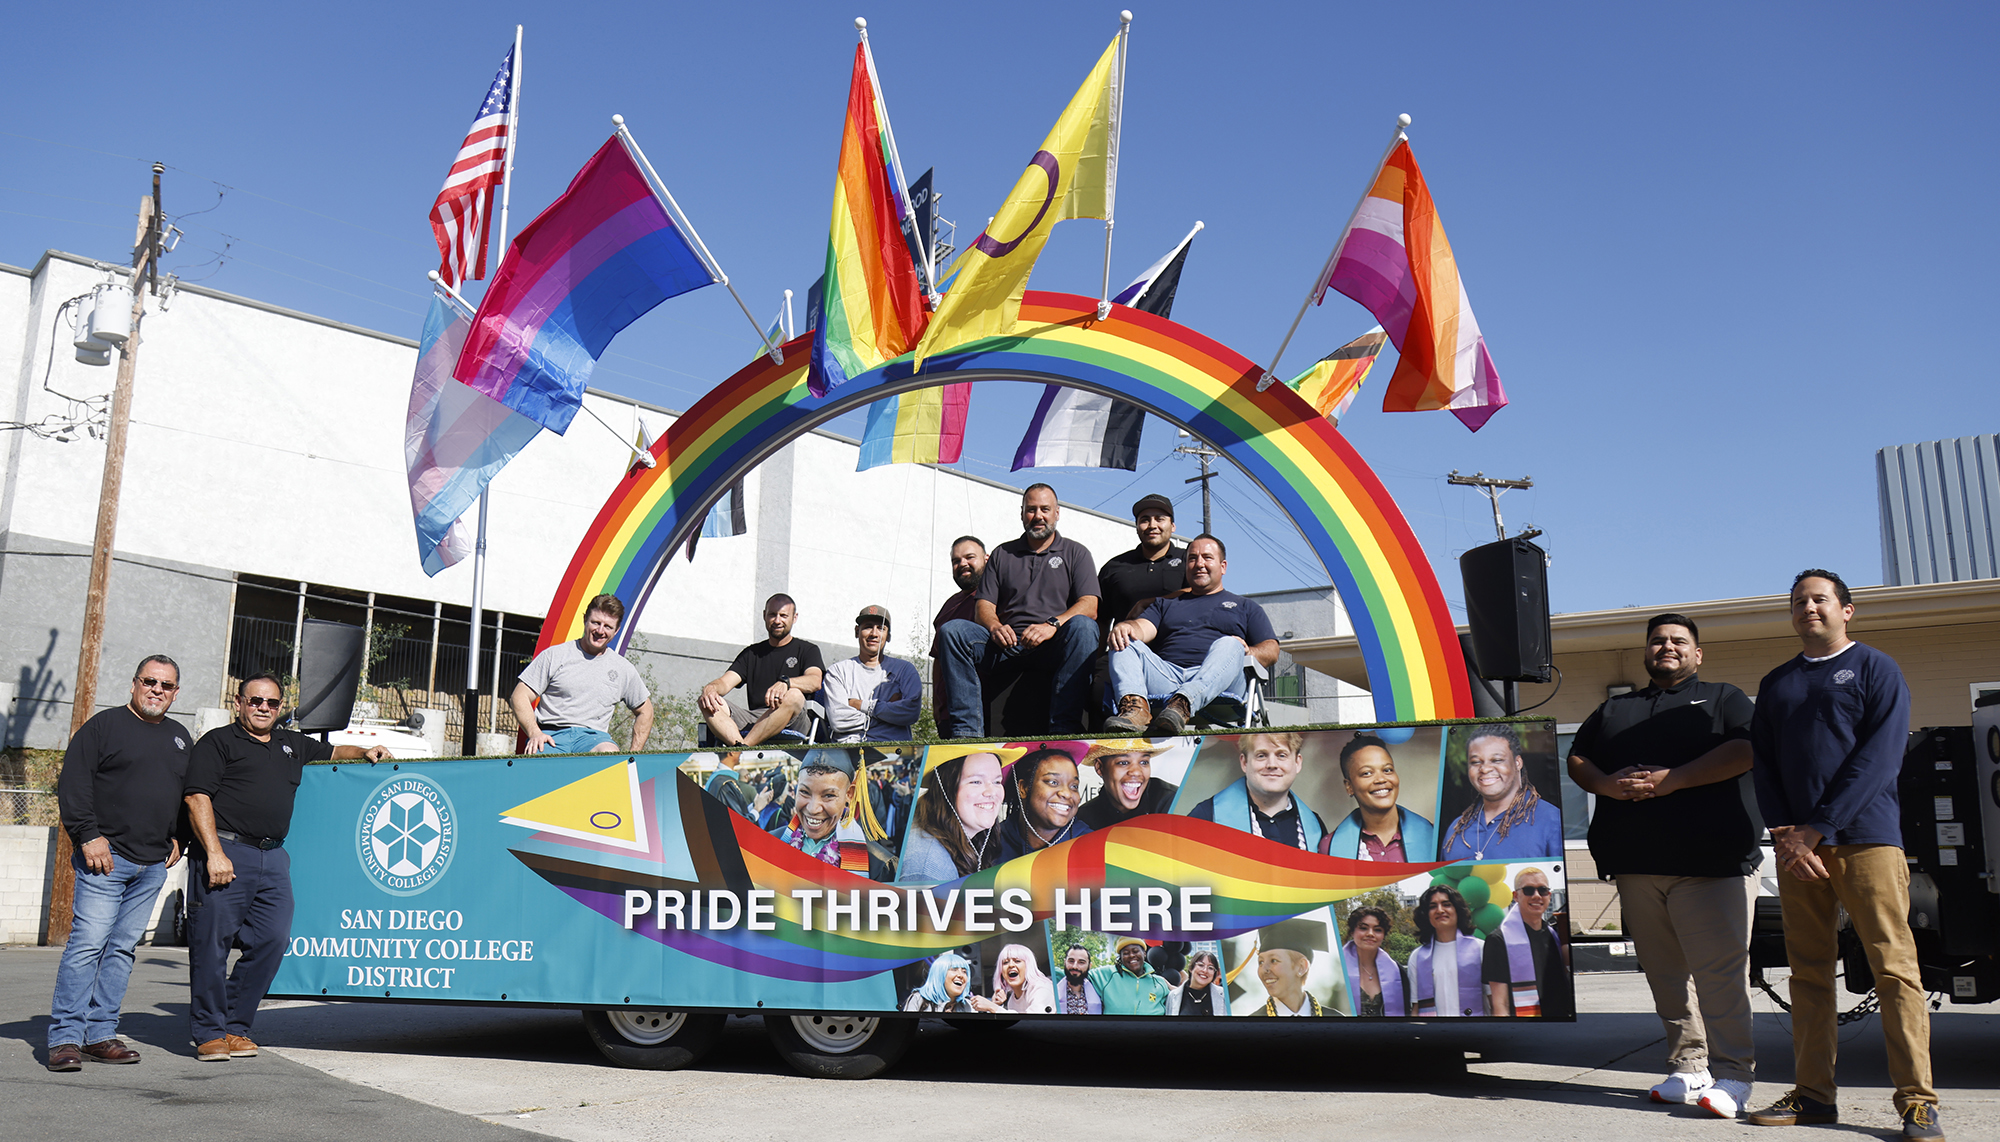 11 people are around the Pride Parade Float. The float has a giant rainbow that extends from the front to the back and has 8 various pride flags that hang on the side of the rainbow. 